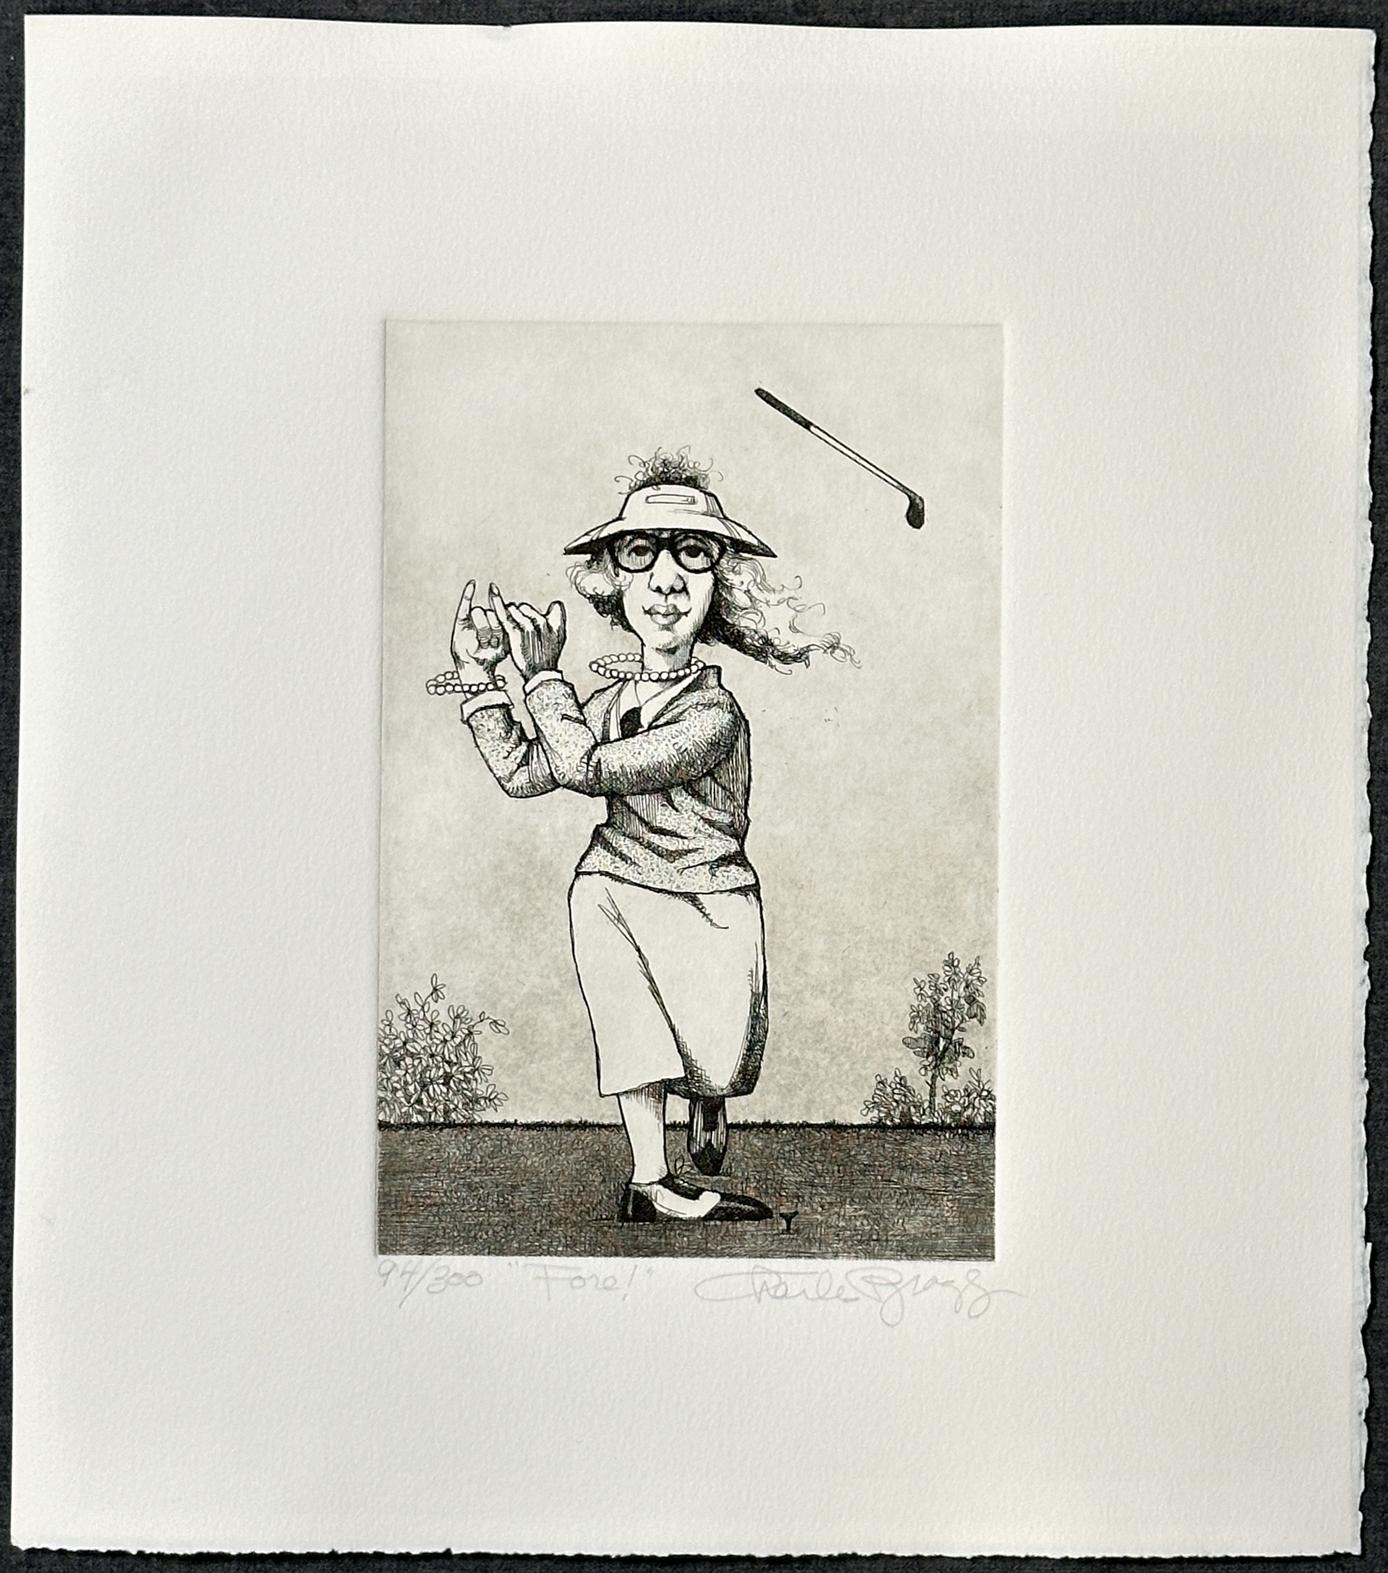 Women In Golf : Fore! 1988 Signed Limited Edition Art Etching - Print by Charles Bragg